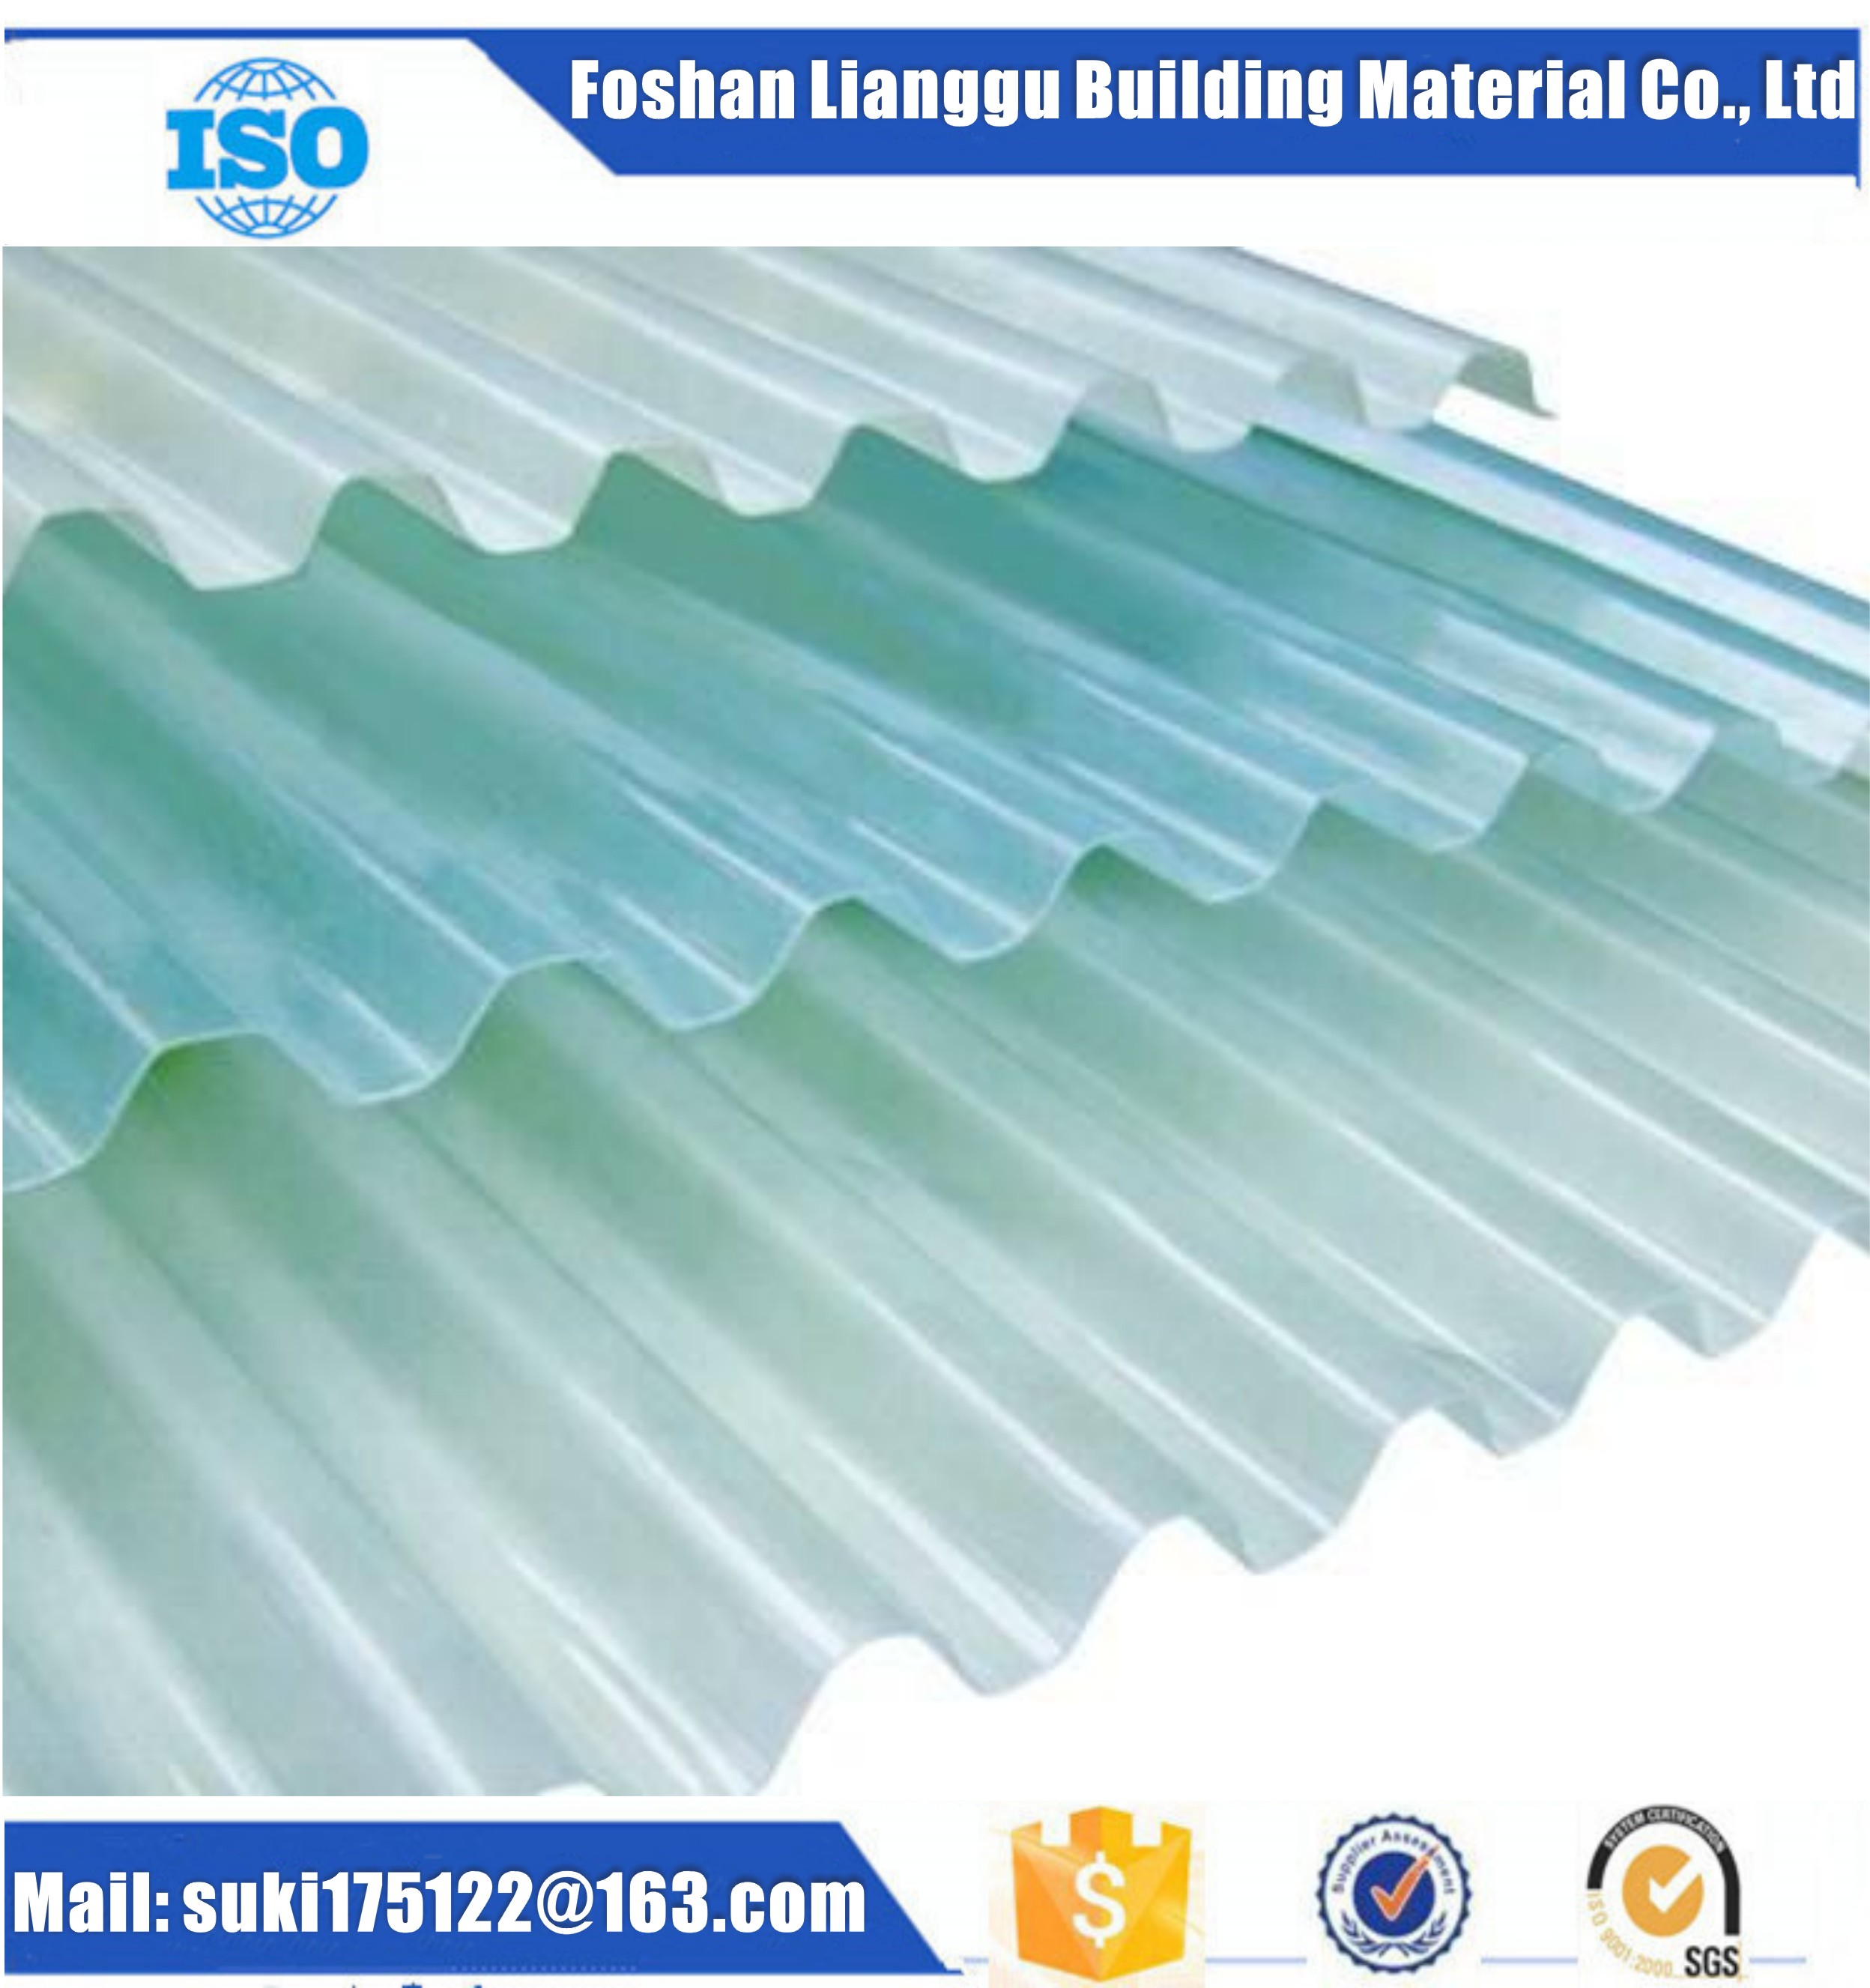 Anti Corrsion Type Fiberglass Reinforced Polyester Frp Corrugated Roofing Sheet Corrugated Board Foshan City Sonche Labor Insurance Supplies Co Ltd